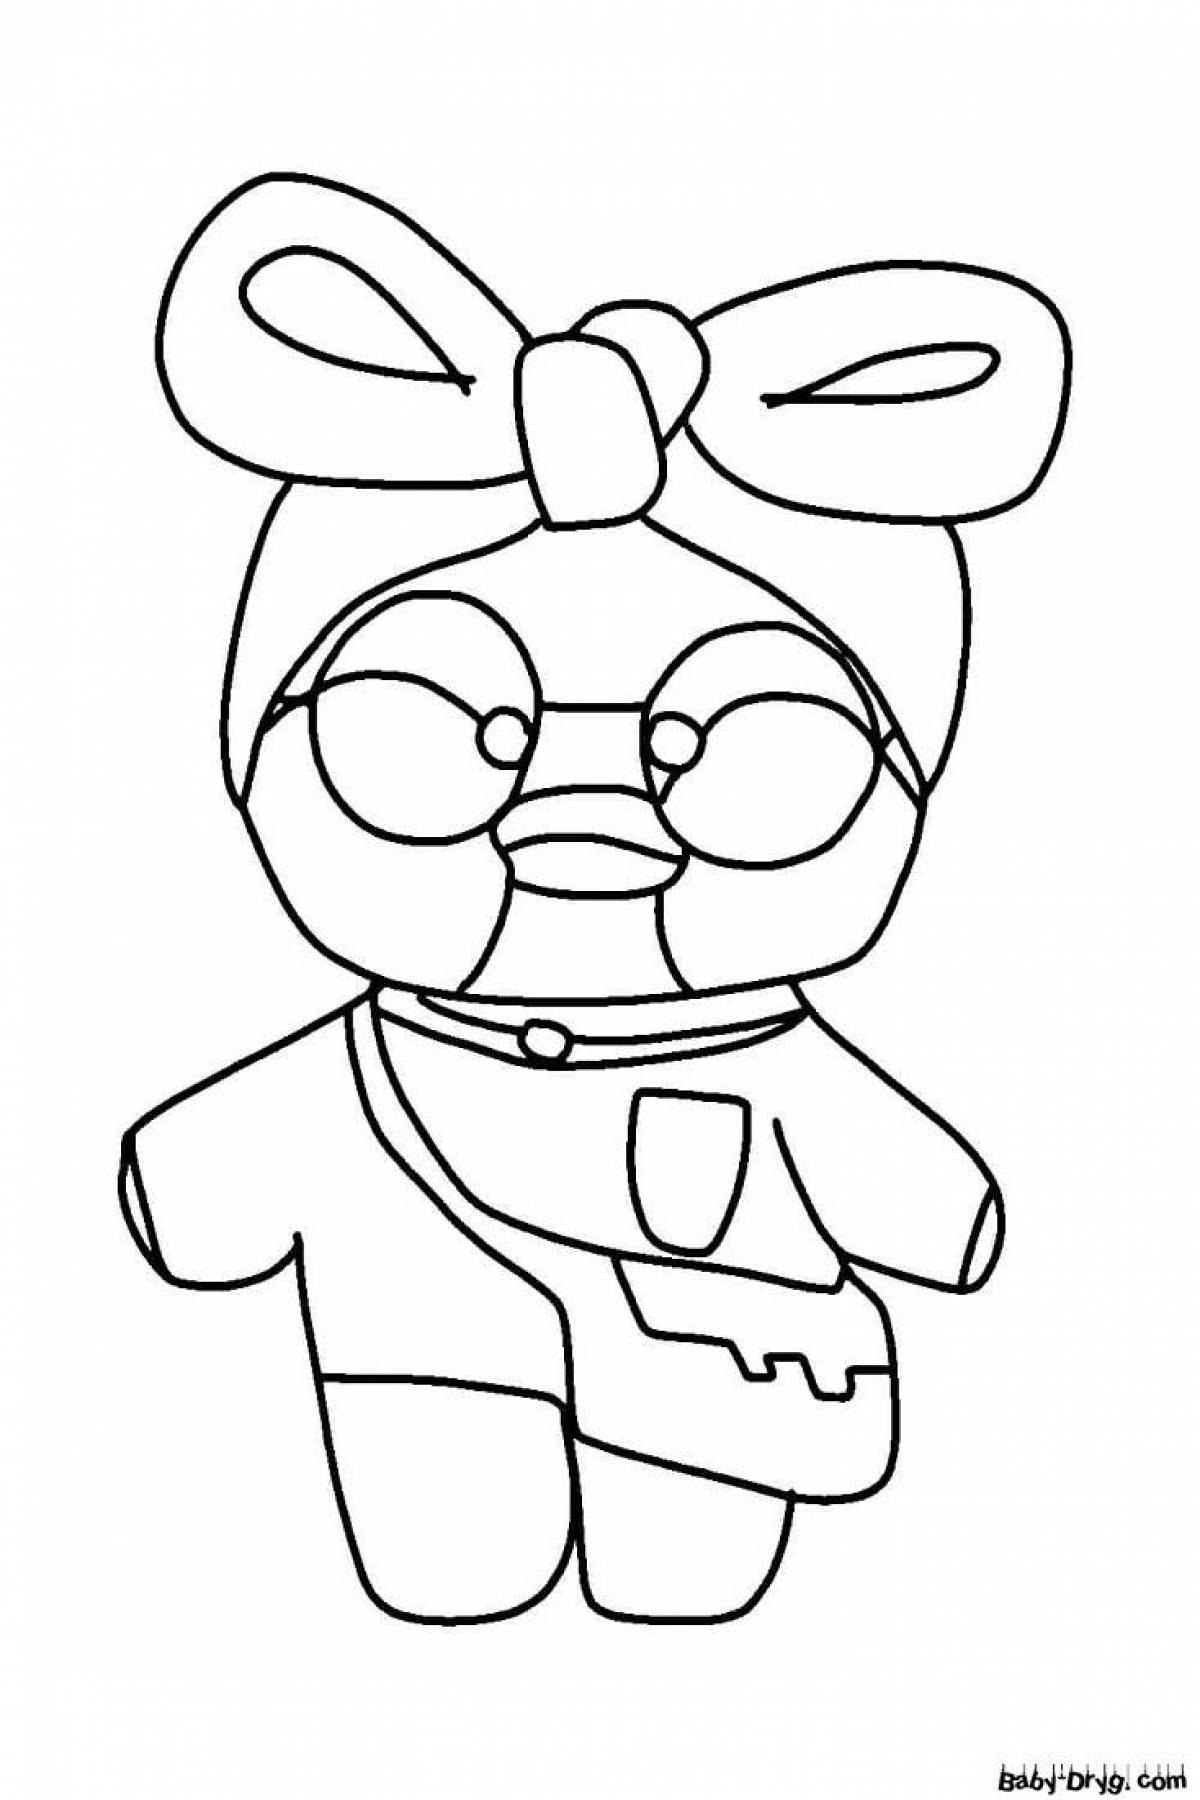 Lalafana duck coloring page filled with color